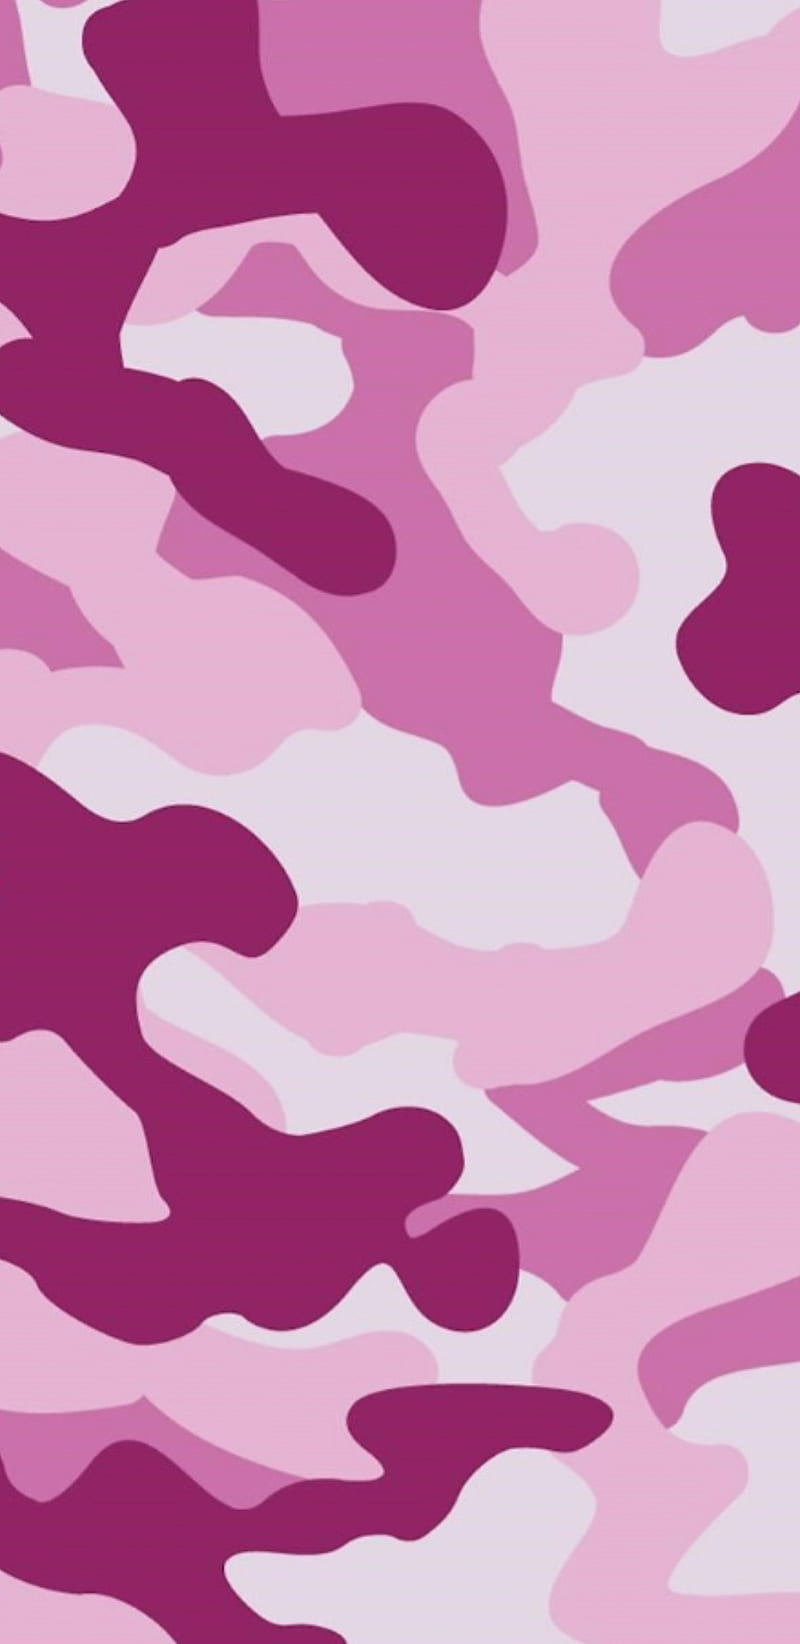 1920x1080px, 1080P free download | Camo, pink, army, HD phone wallpaper ...